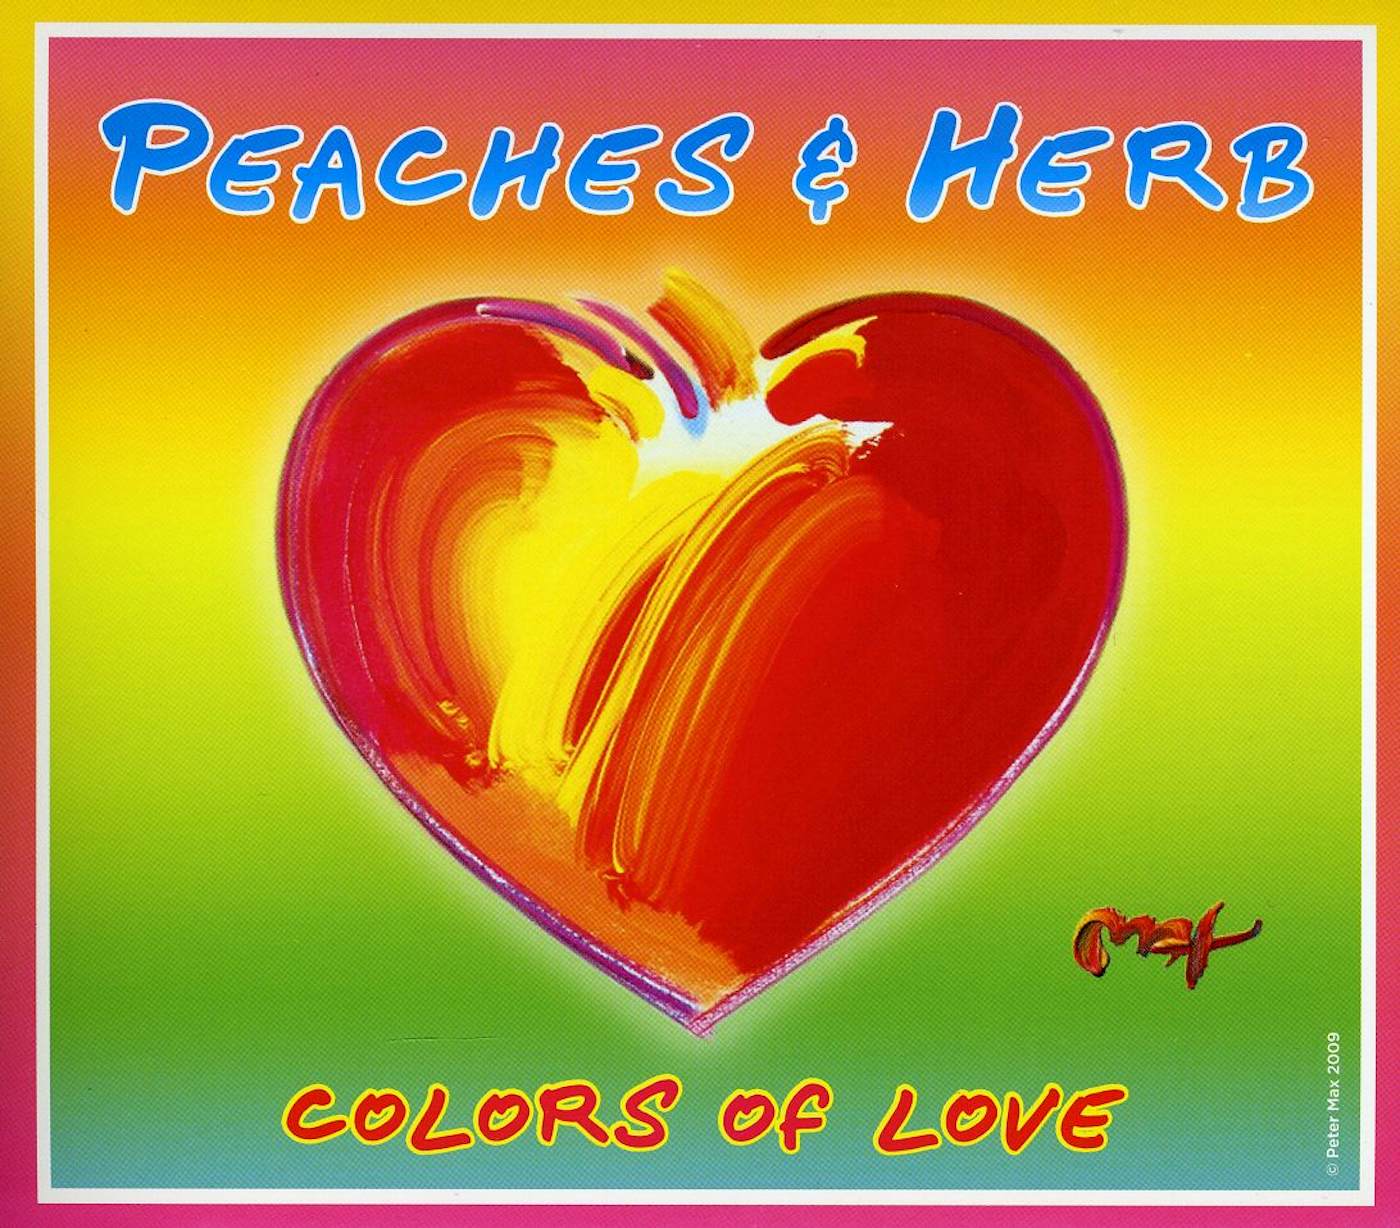 Peaches & Herb - Remember (Remastered Edition) -  Music